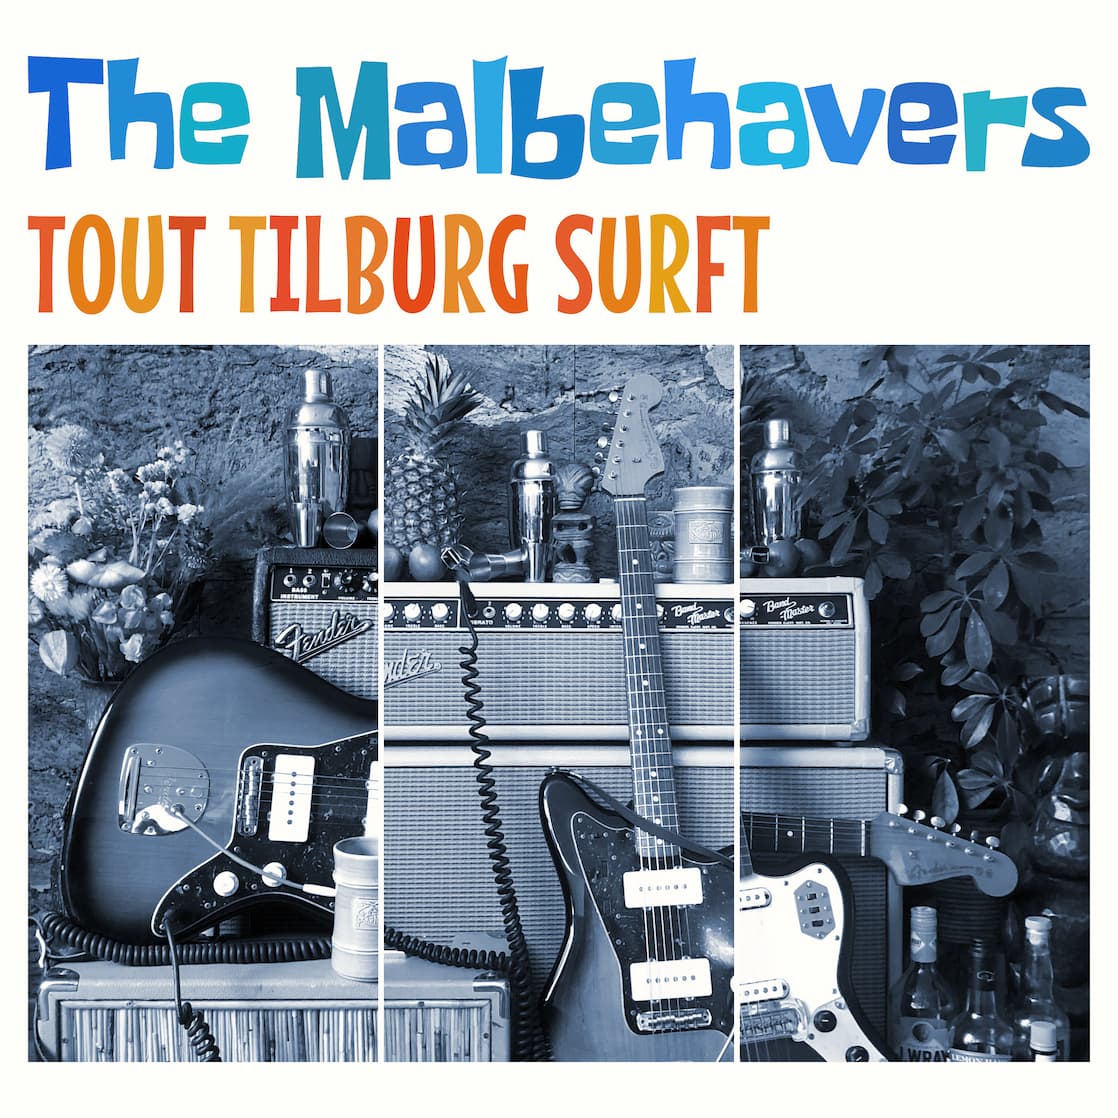 Cover of The Malbehavers’ EP “Tout Tilburg Surft”